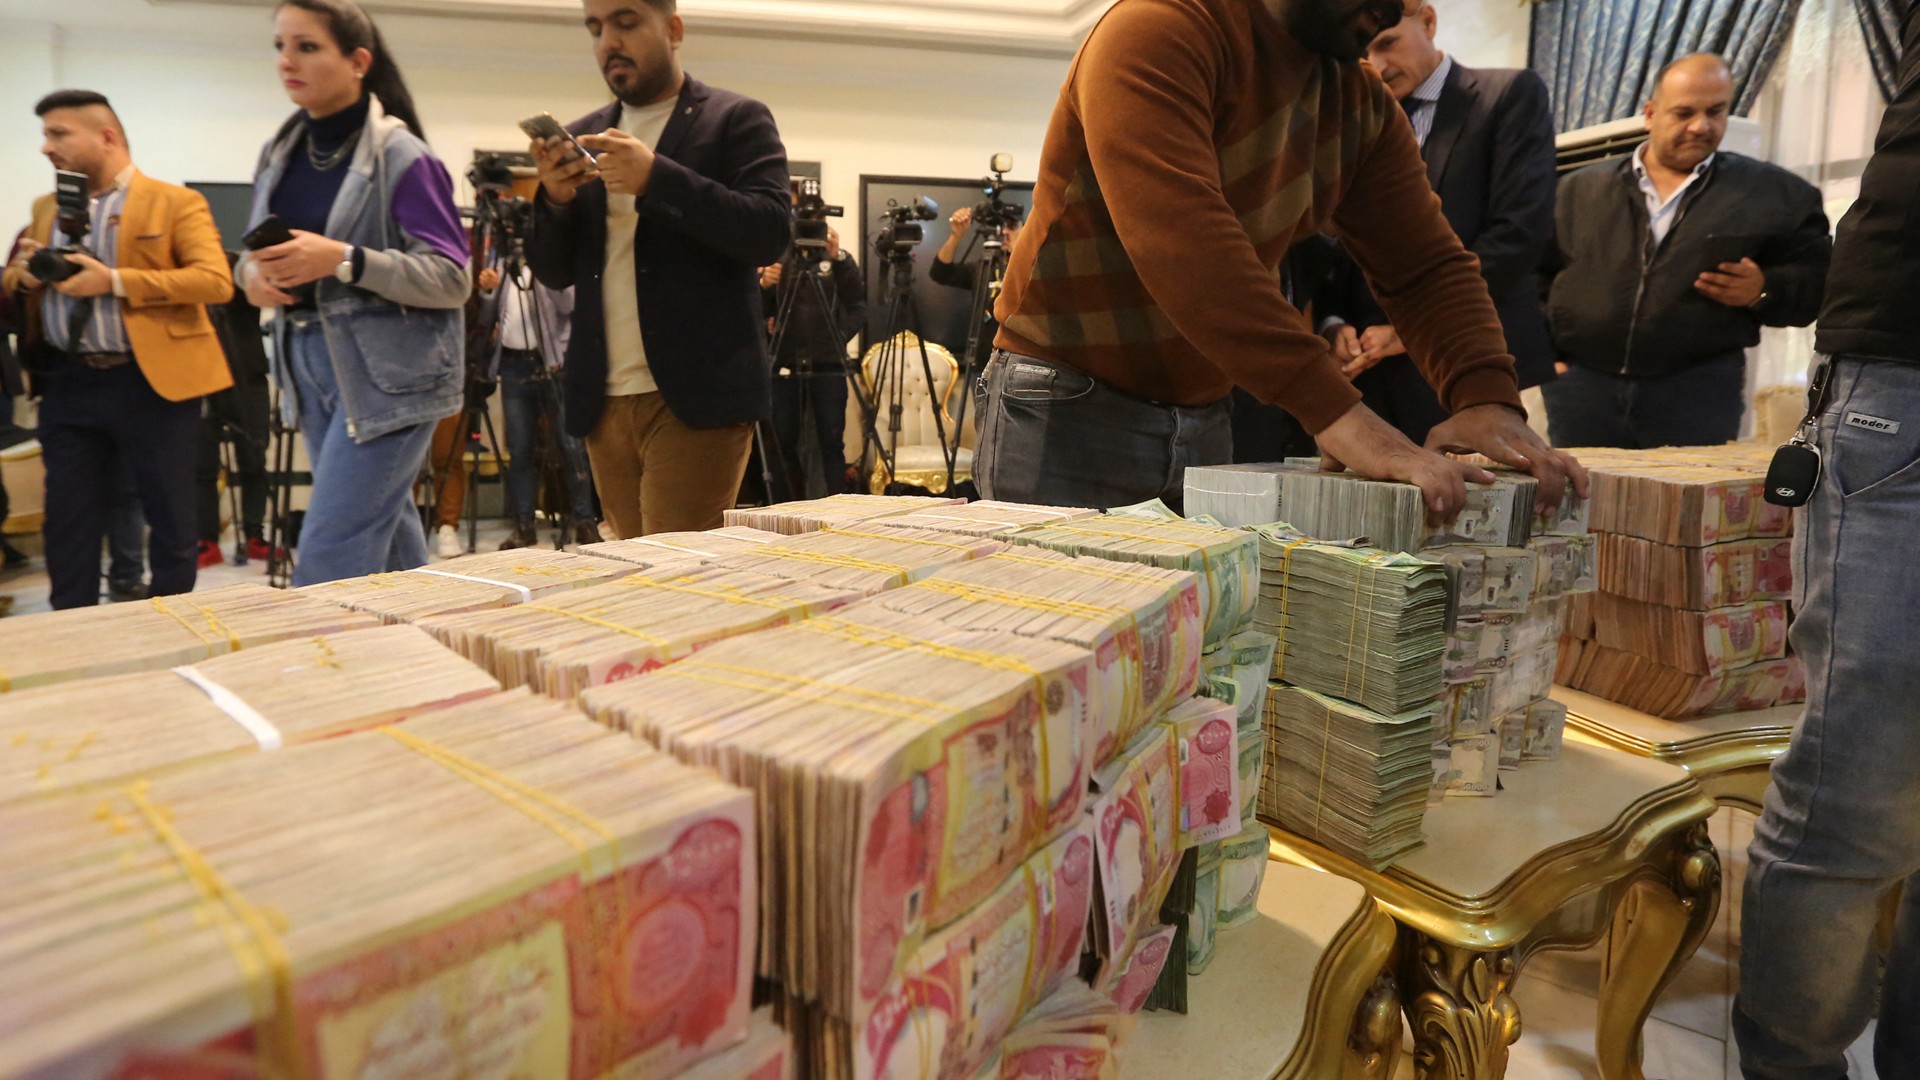 Journalists arrive for a news conference to announce the recovery of 4bn dinars, reportedly part of the $2.5bn fraudulently stolen from the tax authorities (AFP)